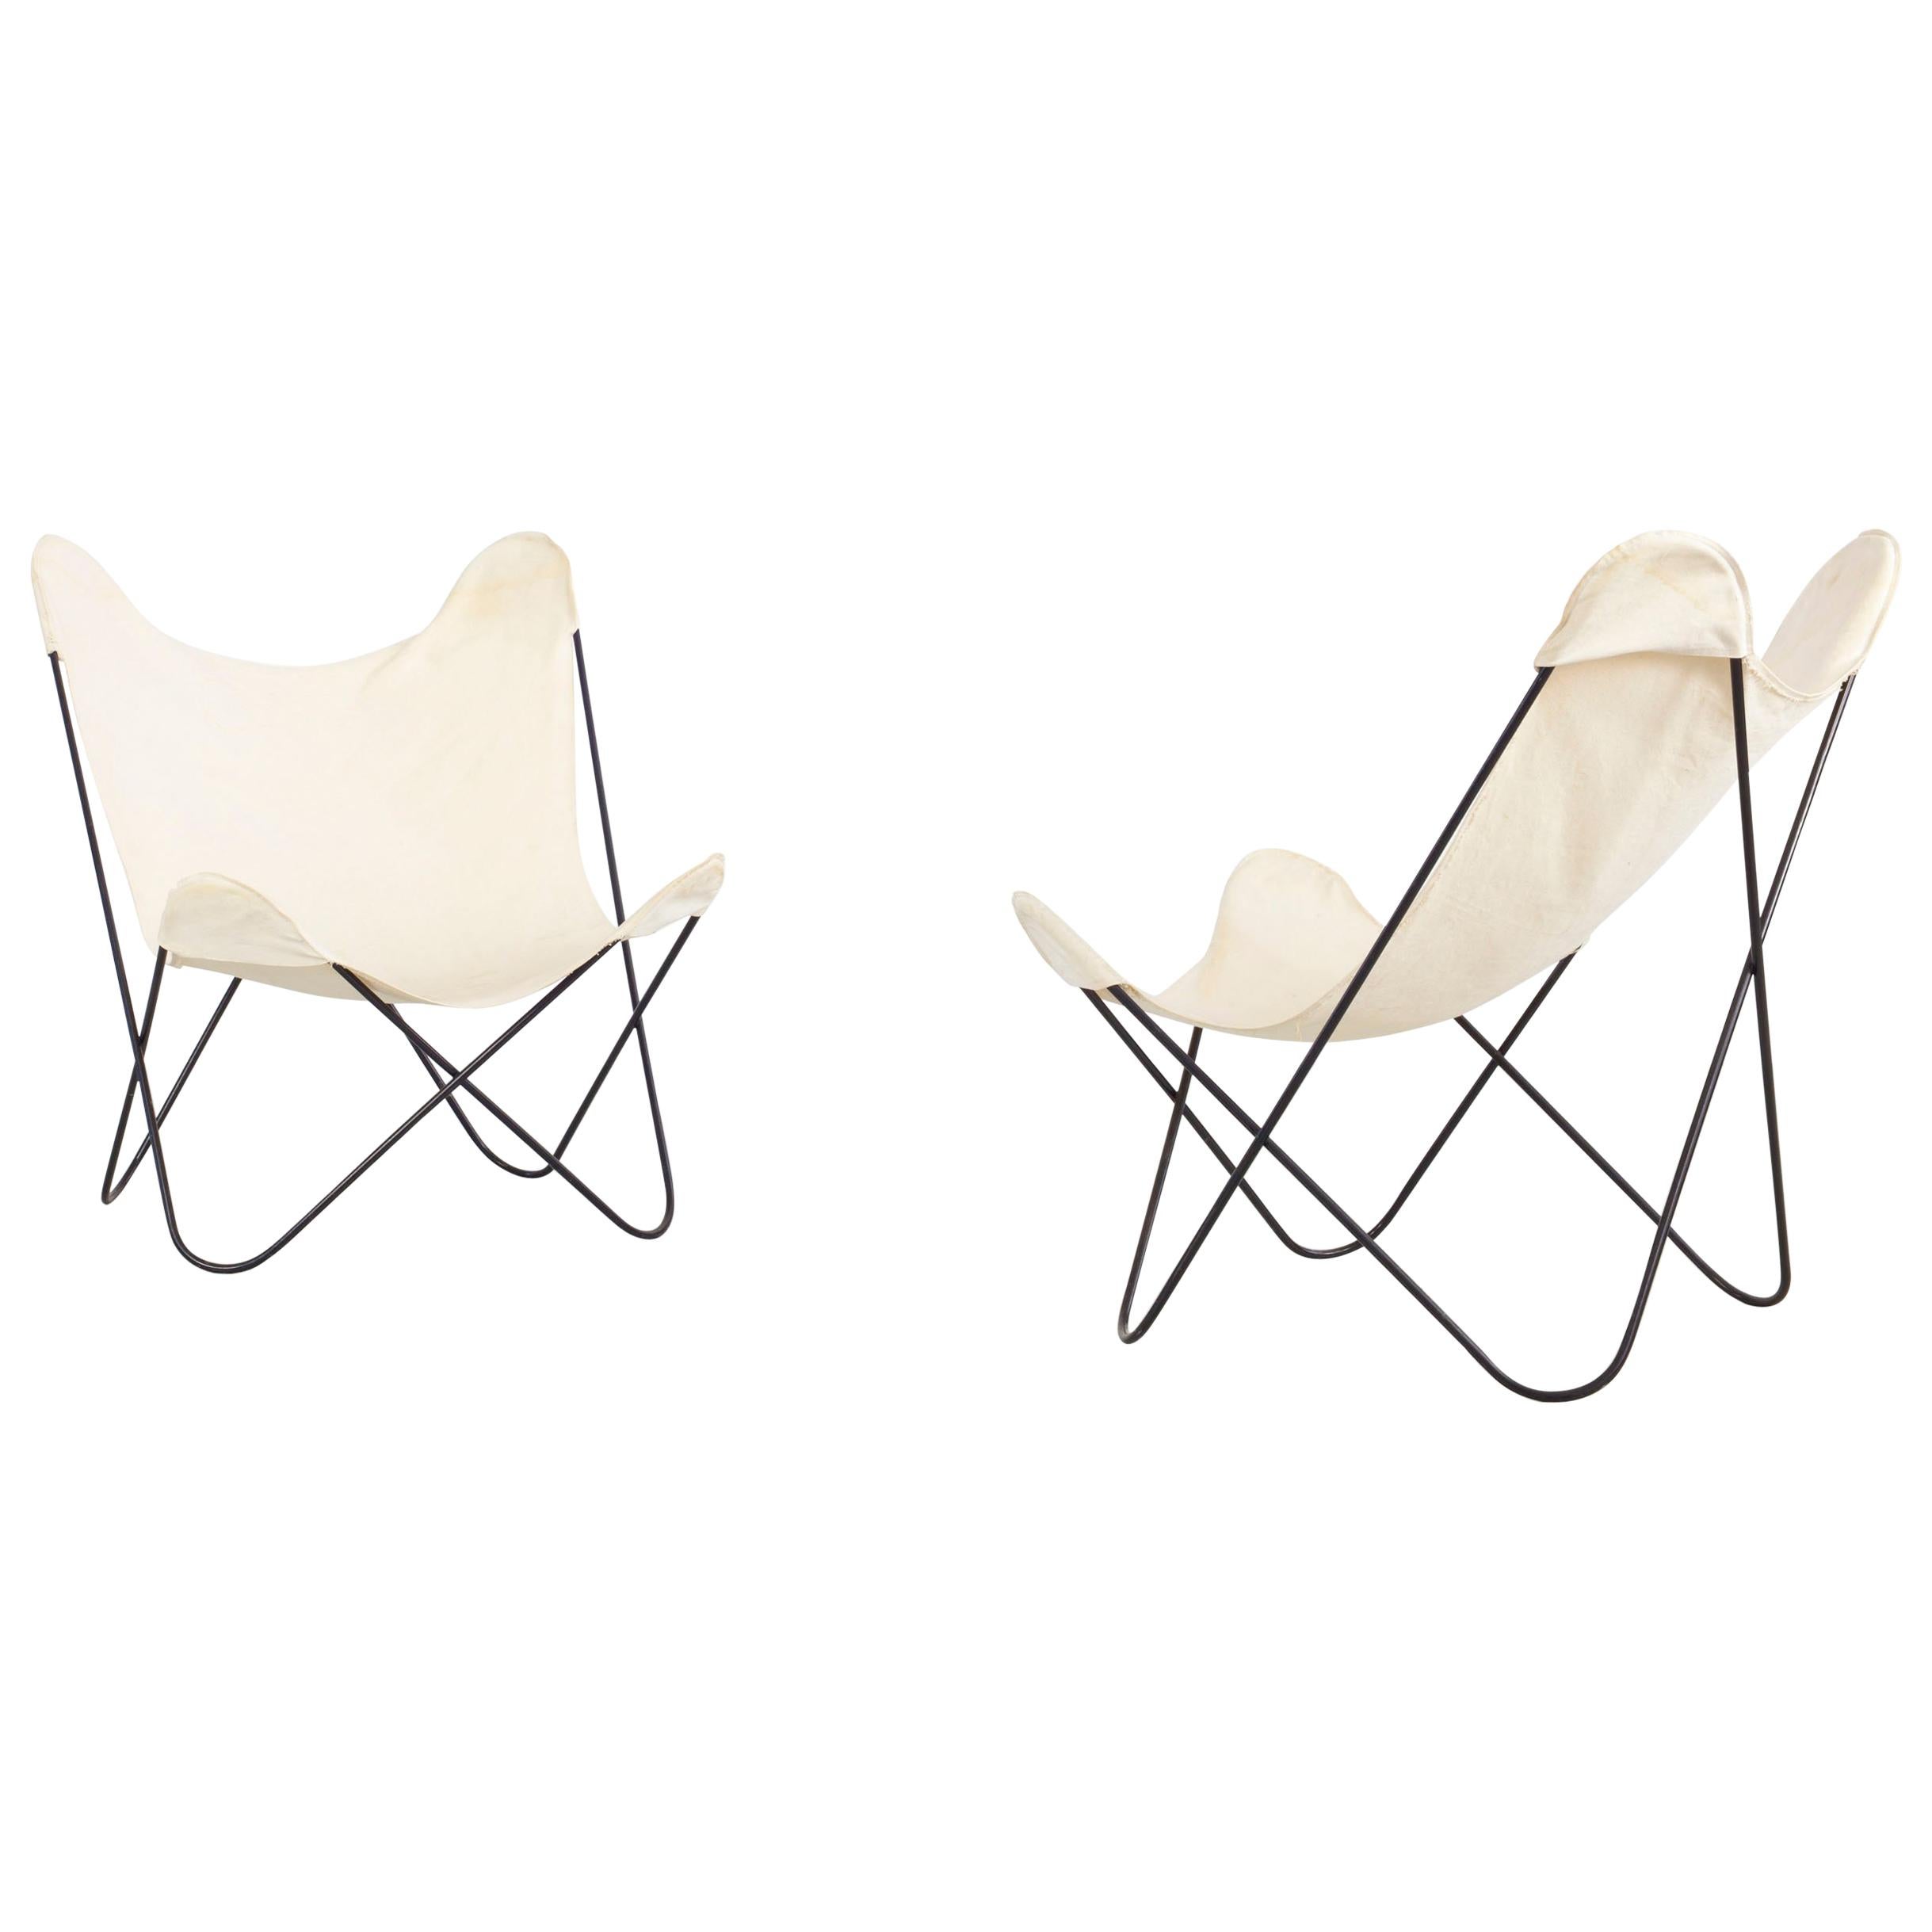 Gastone Rinaldi Italian Pair of White "Tripolina" Chairs Manufactured by Rima For Sale